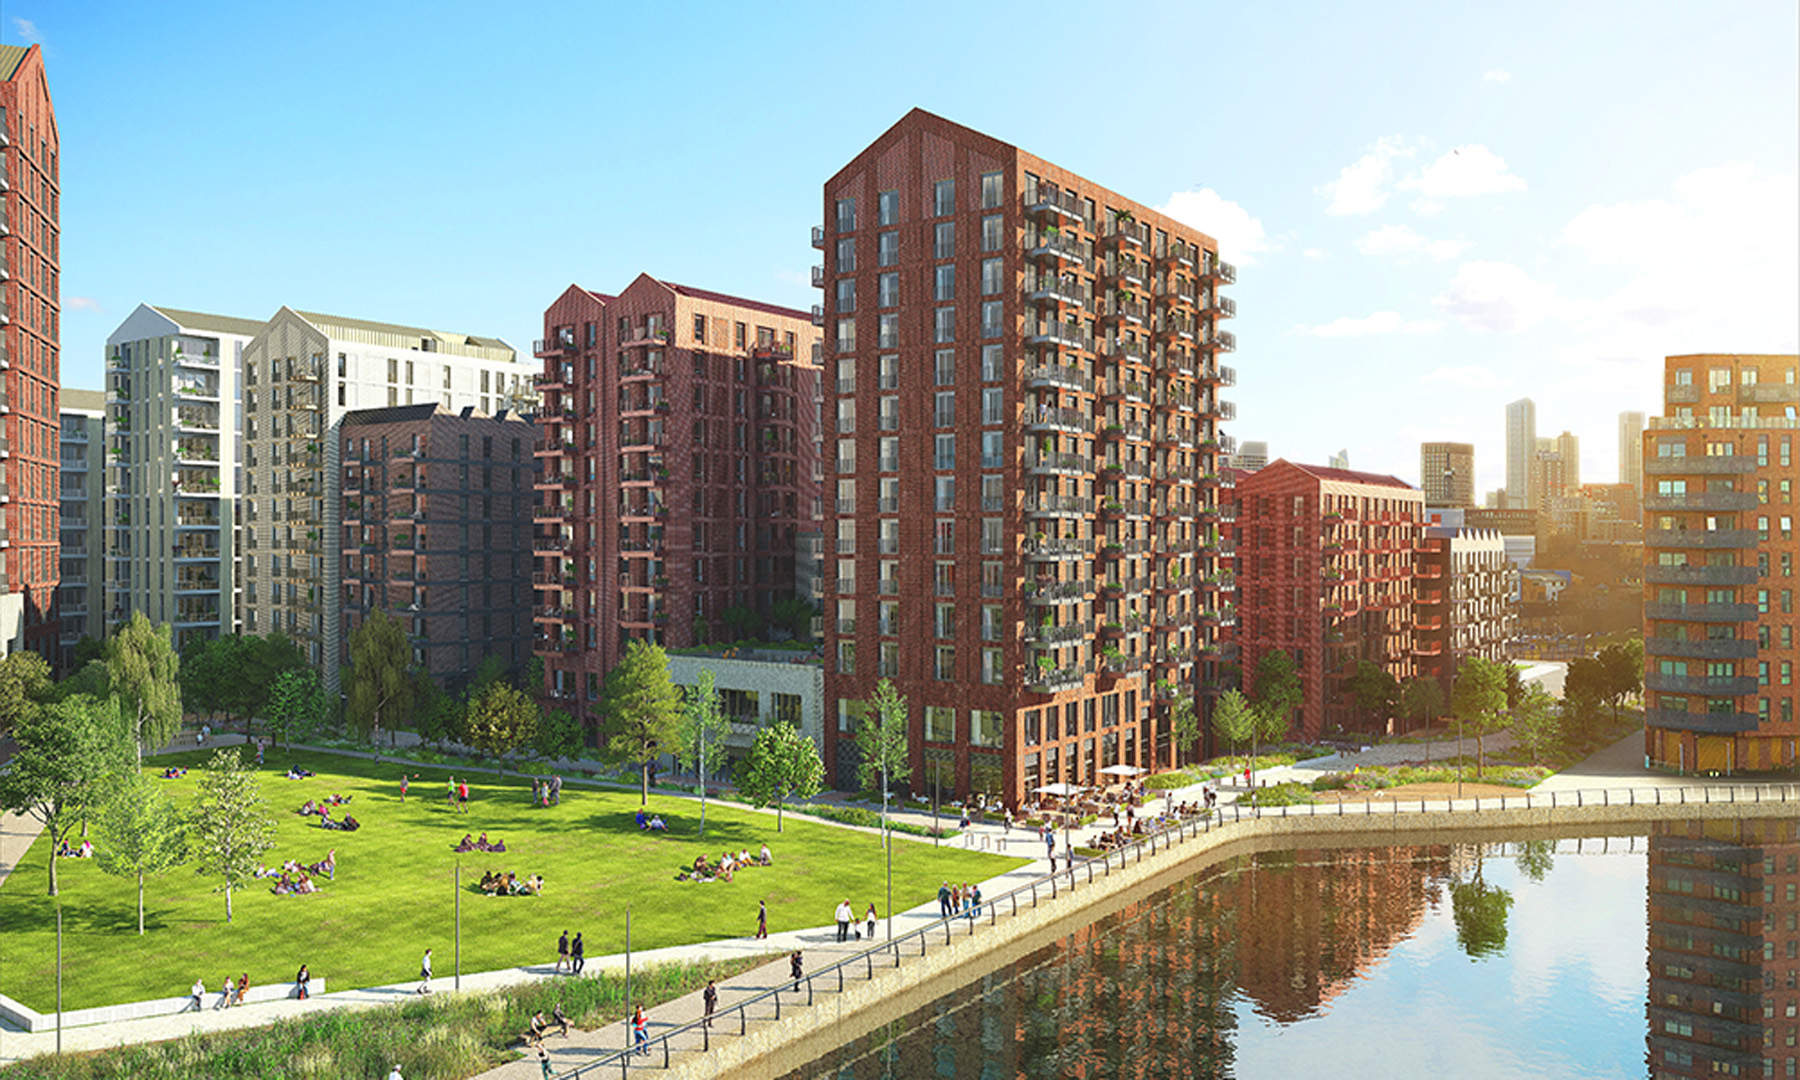 Hadham Engineering partner with AliDeck on an exciting multi-stage development project, Poplar Riverside, in London